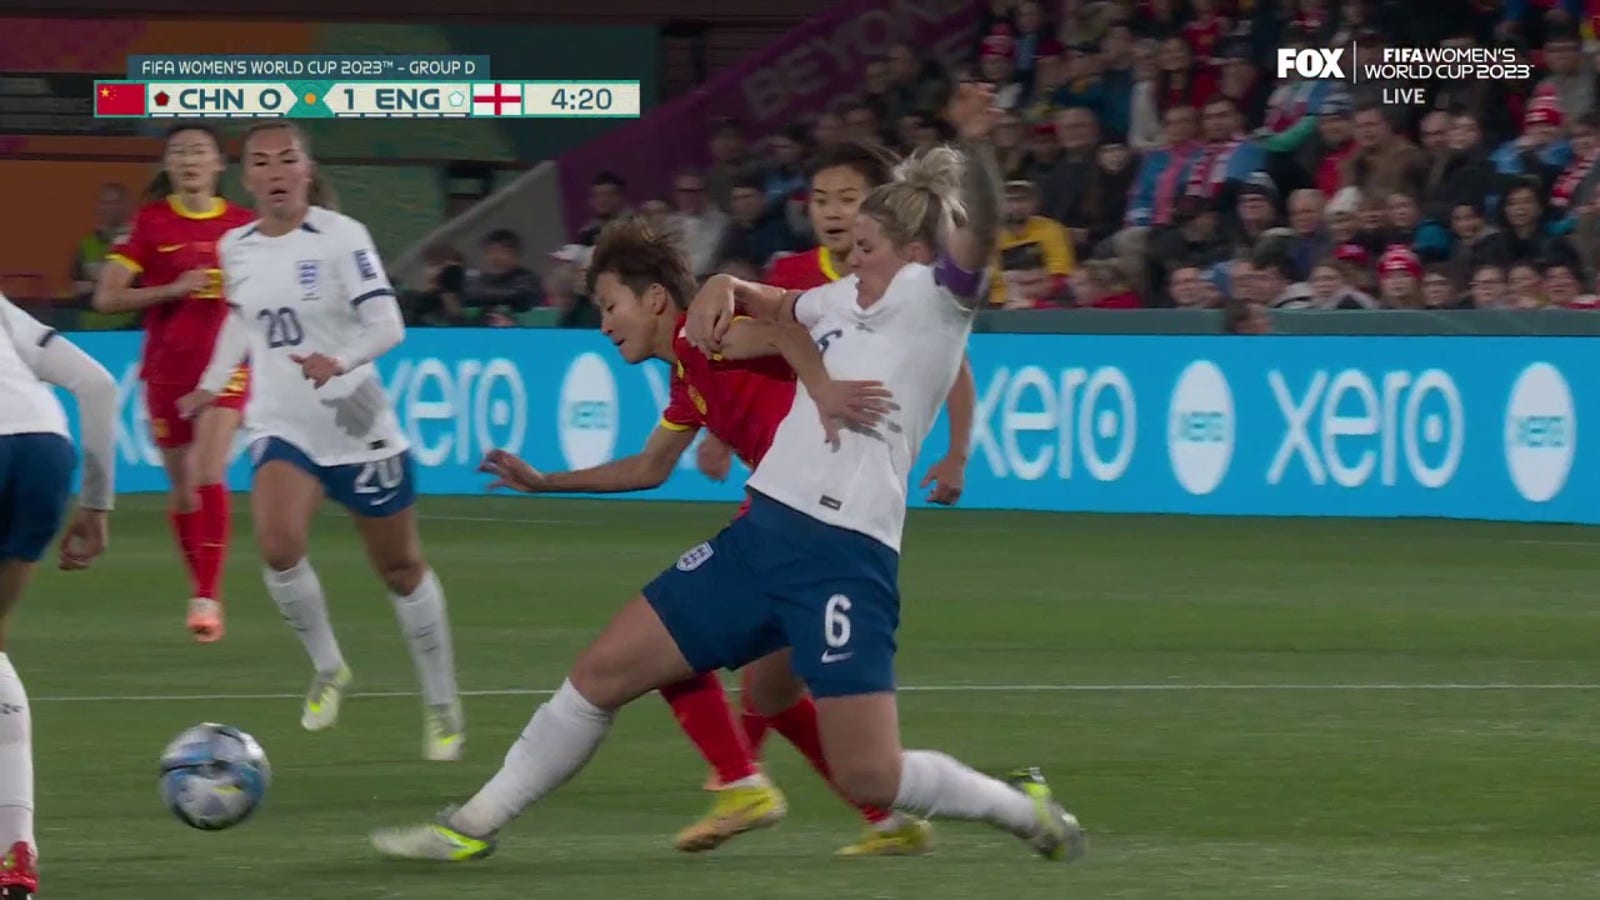 England's Alessia Russo scores goal vs. China in 4'